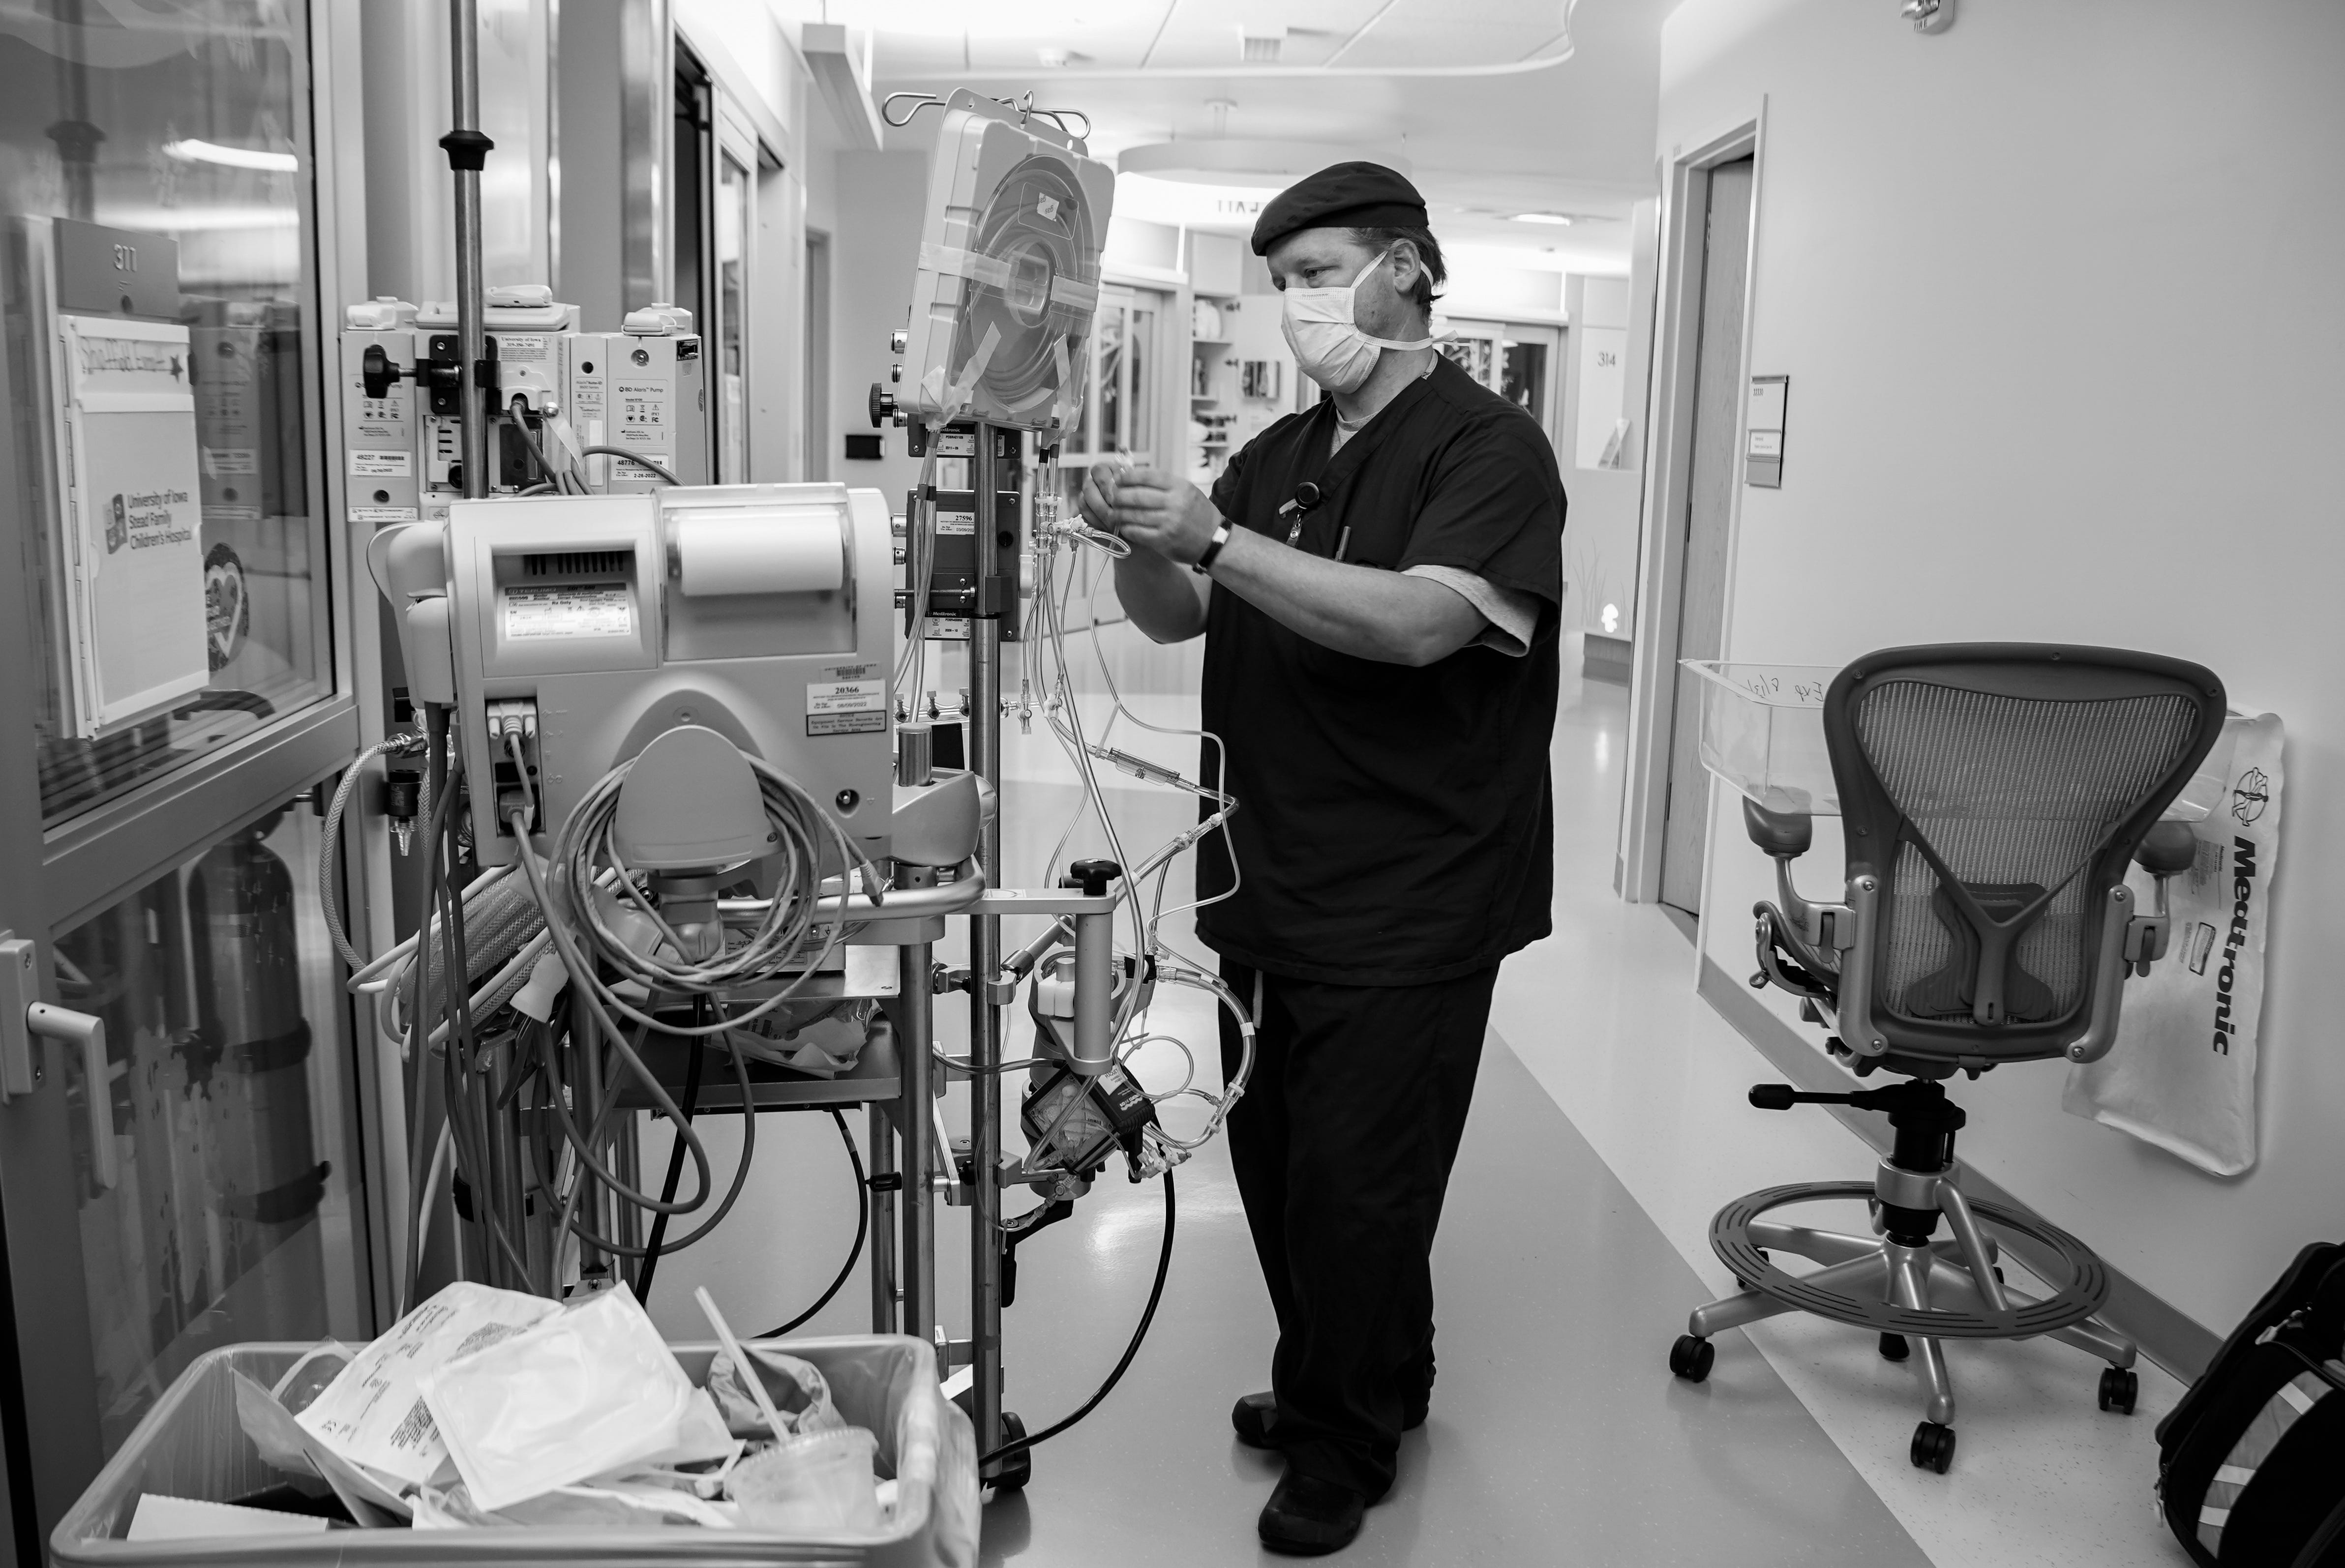 Oct 7, 2021; Iowa City, IA, United States; Veteran nurse and ECMO specialist Mike MacCormick builds an ECMO pump in the hall at University of Iowa Stead Family Children's Hospital Pediatric Intensive Care Unit. MacCormick lost his daughter, Gabriella, to COVID-19 last January and now continues to work as an ECMO specialist with COVID patients. Mandatory Credit: Jessica Koscielniak-USA TODAY